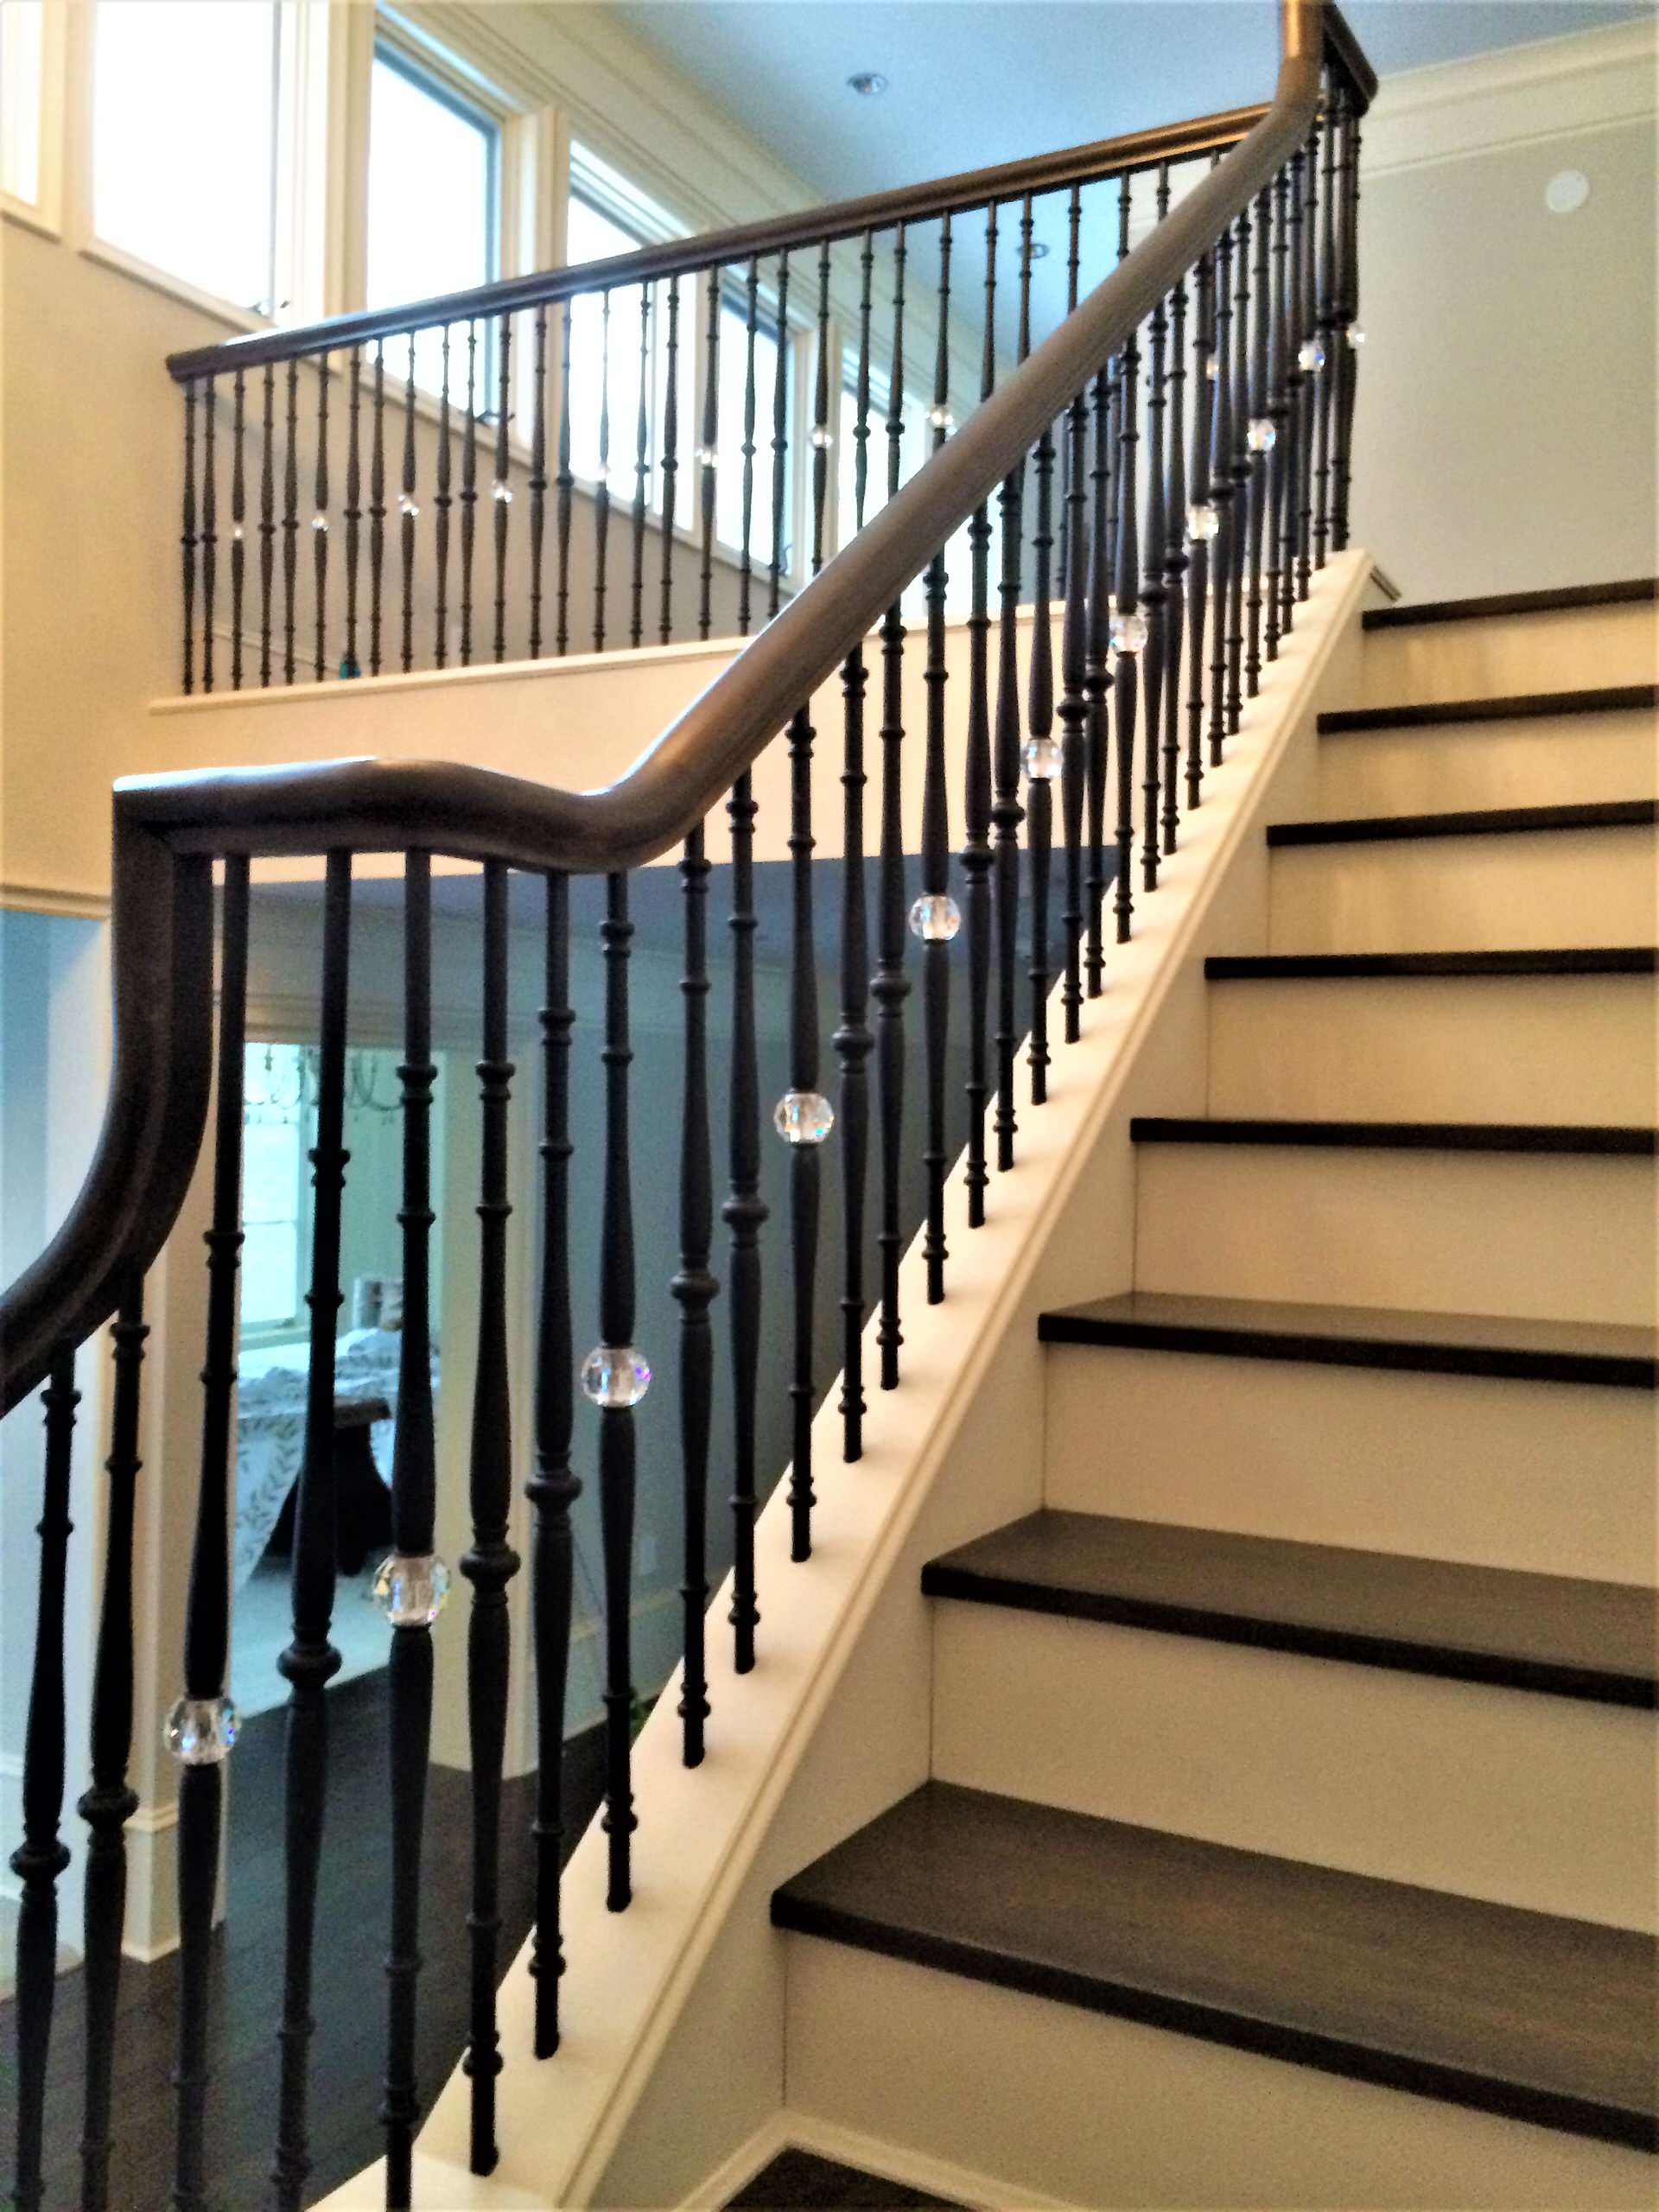 Traditional railing with swarovski crystal balusters - Traditional -  Staircase - by Capozzoli Stairworks | Houzz